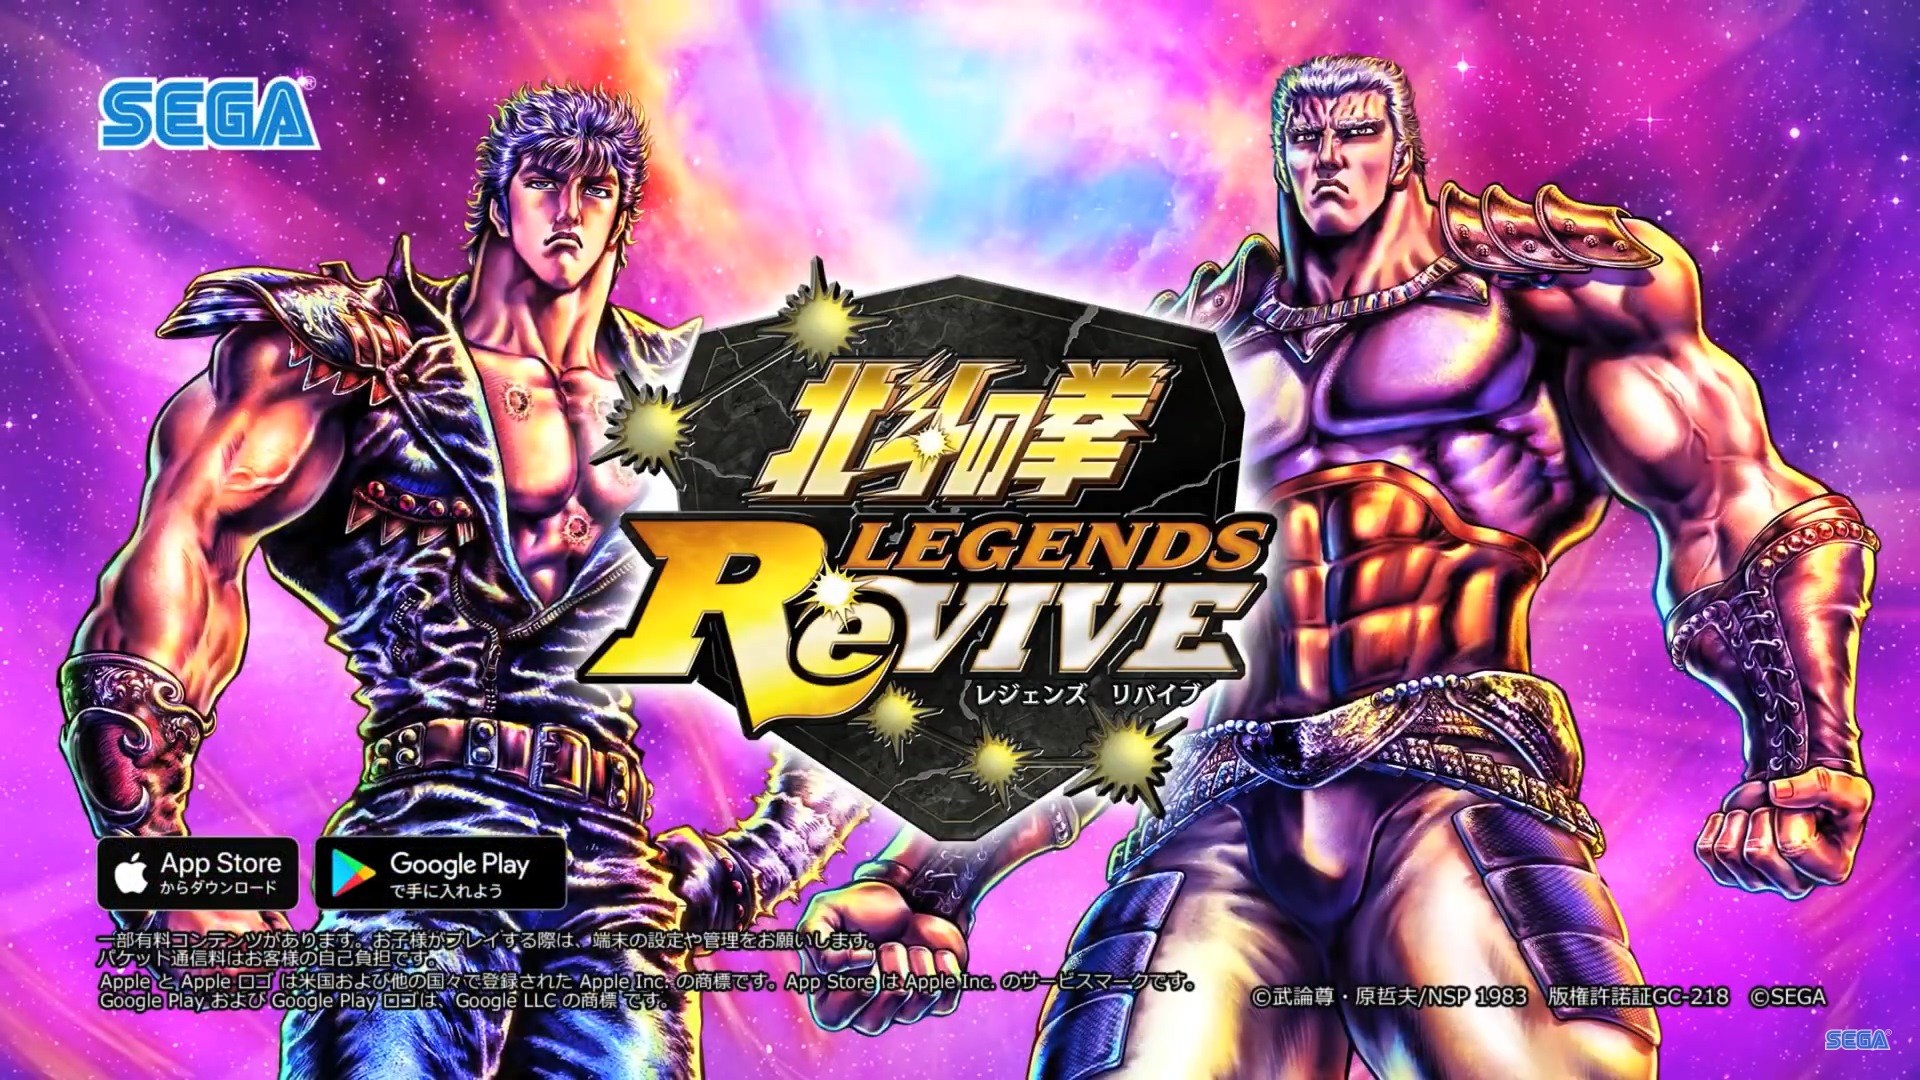 Fist Of The North Star Legends Revive - HD Wallpaper 